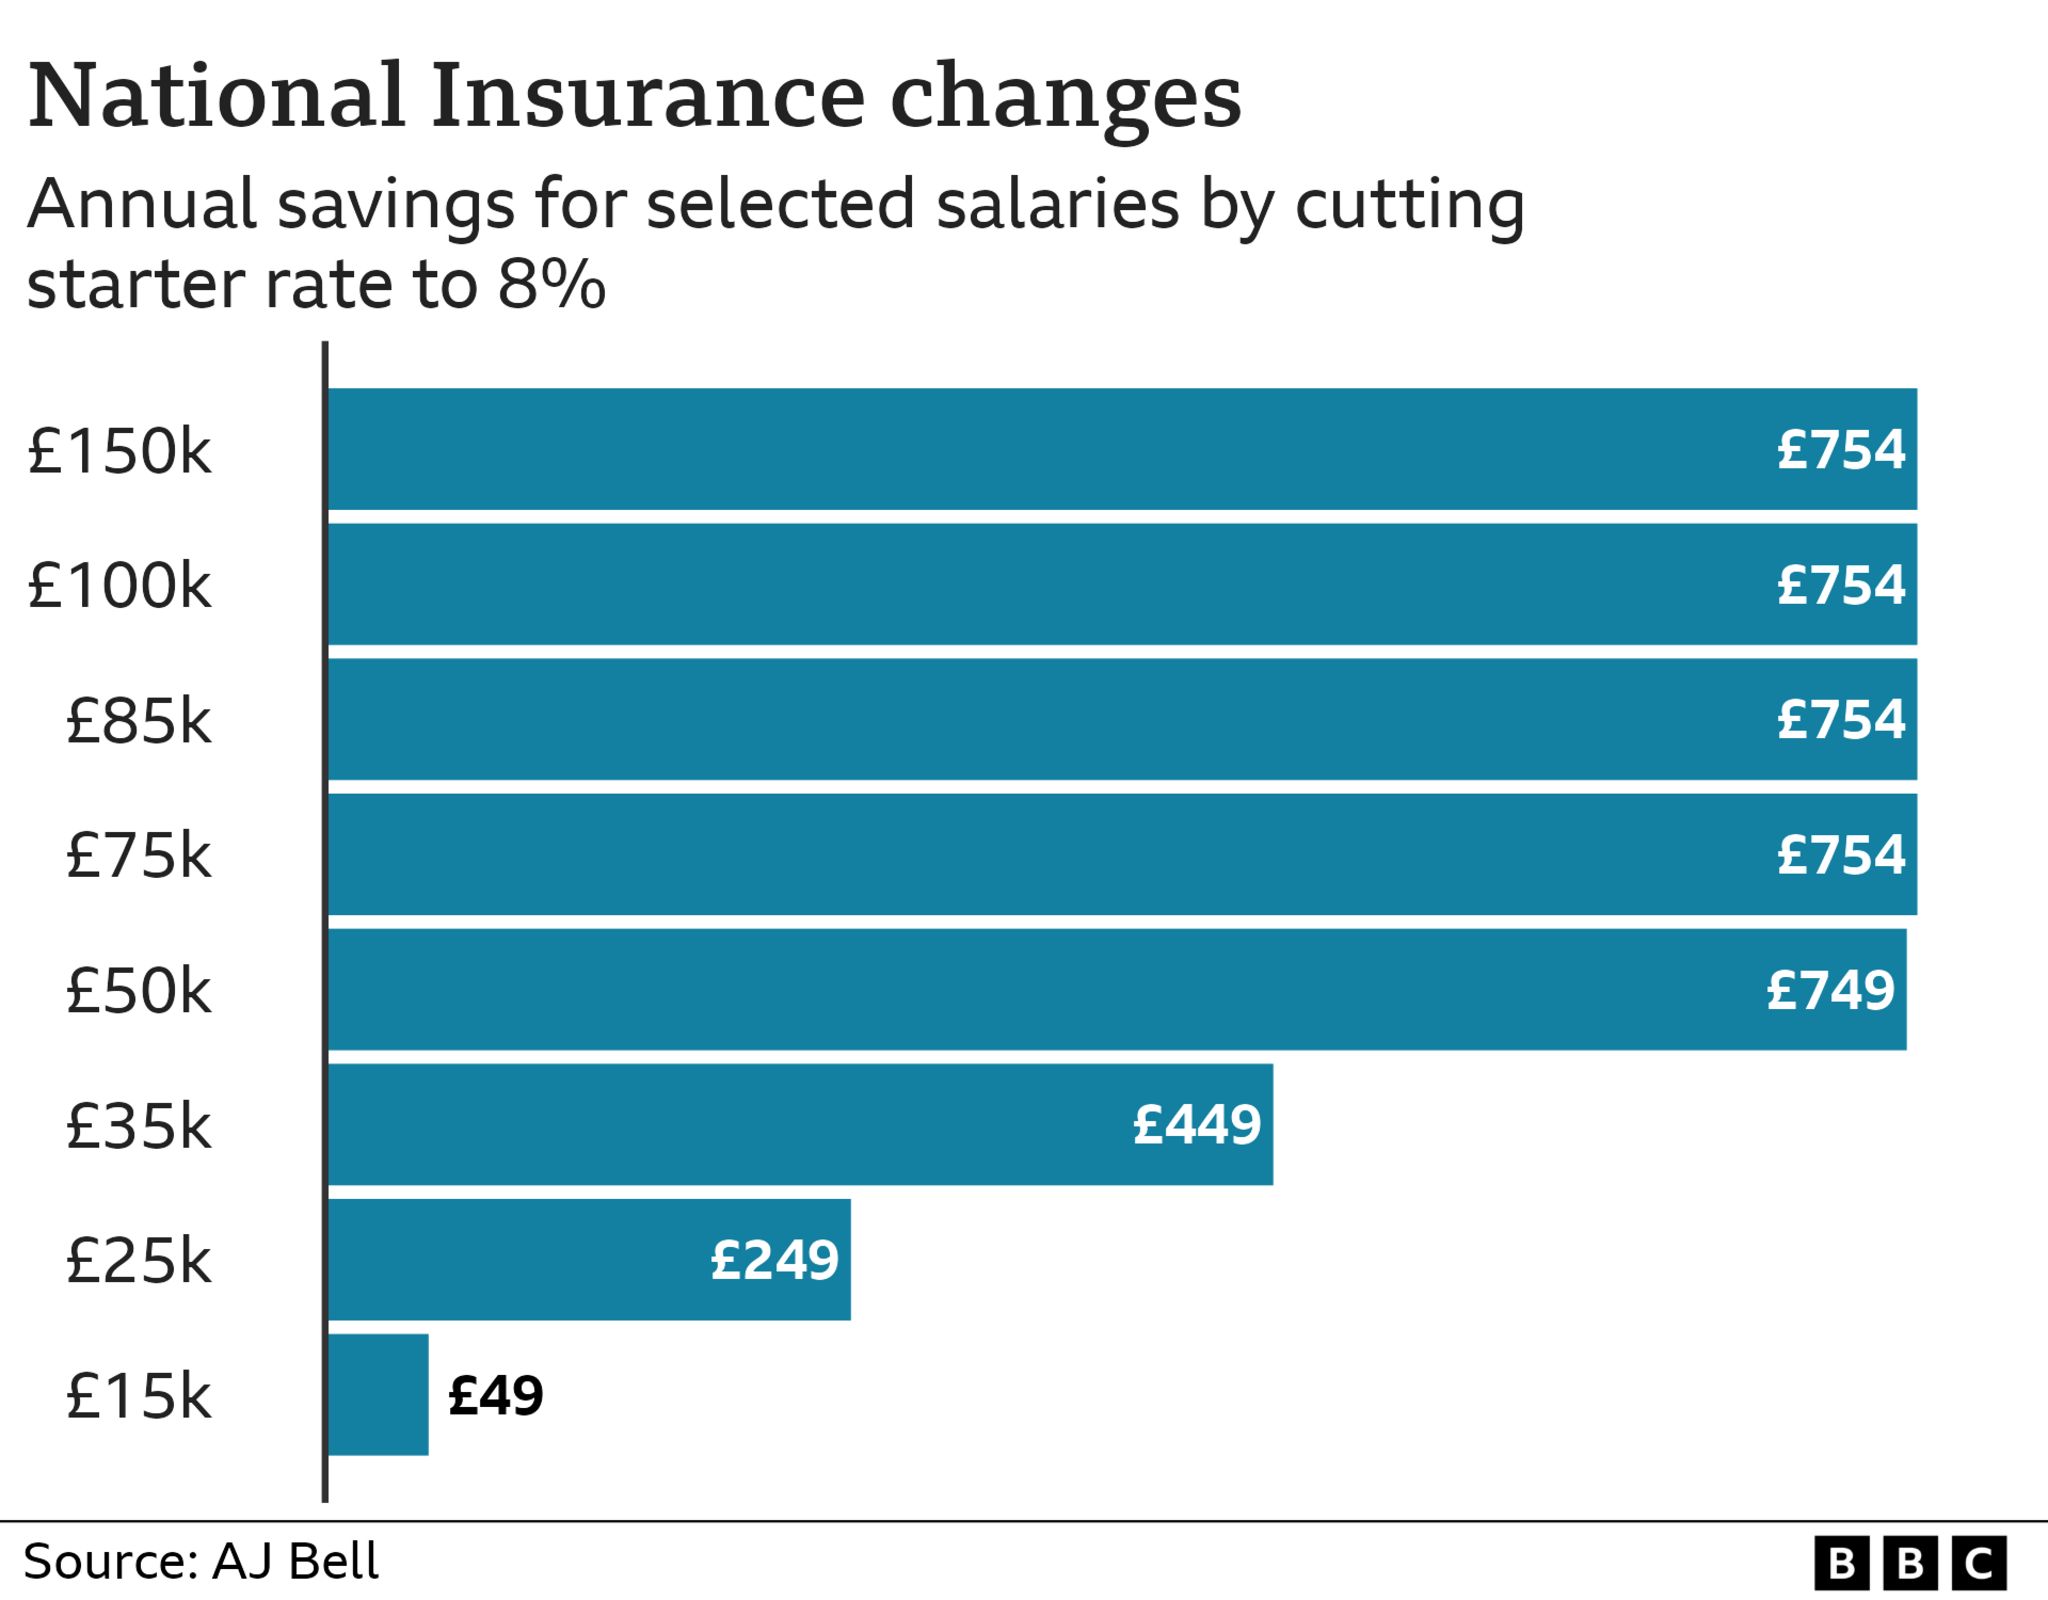 Impact of National Insurance changes as estimated by AJ Bell